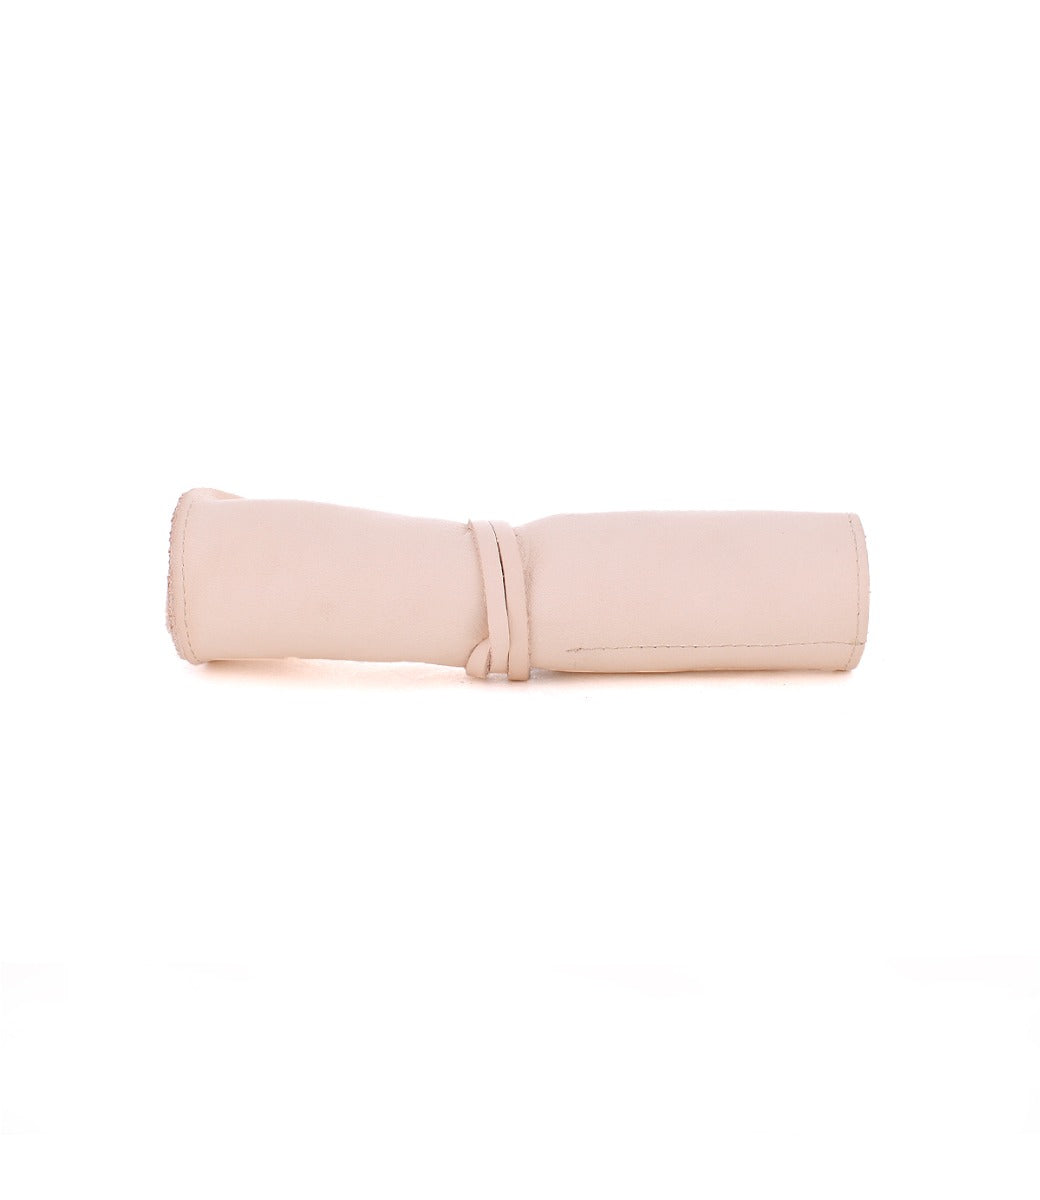 A pink leather Prepped pencil case on a white background by Bed Stu.